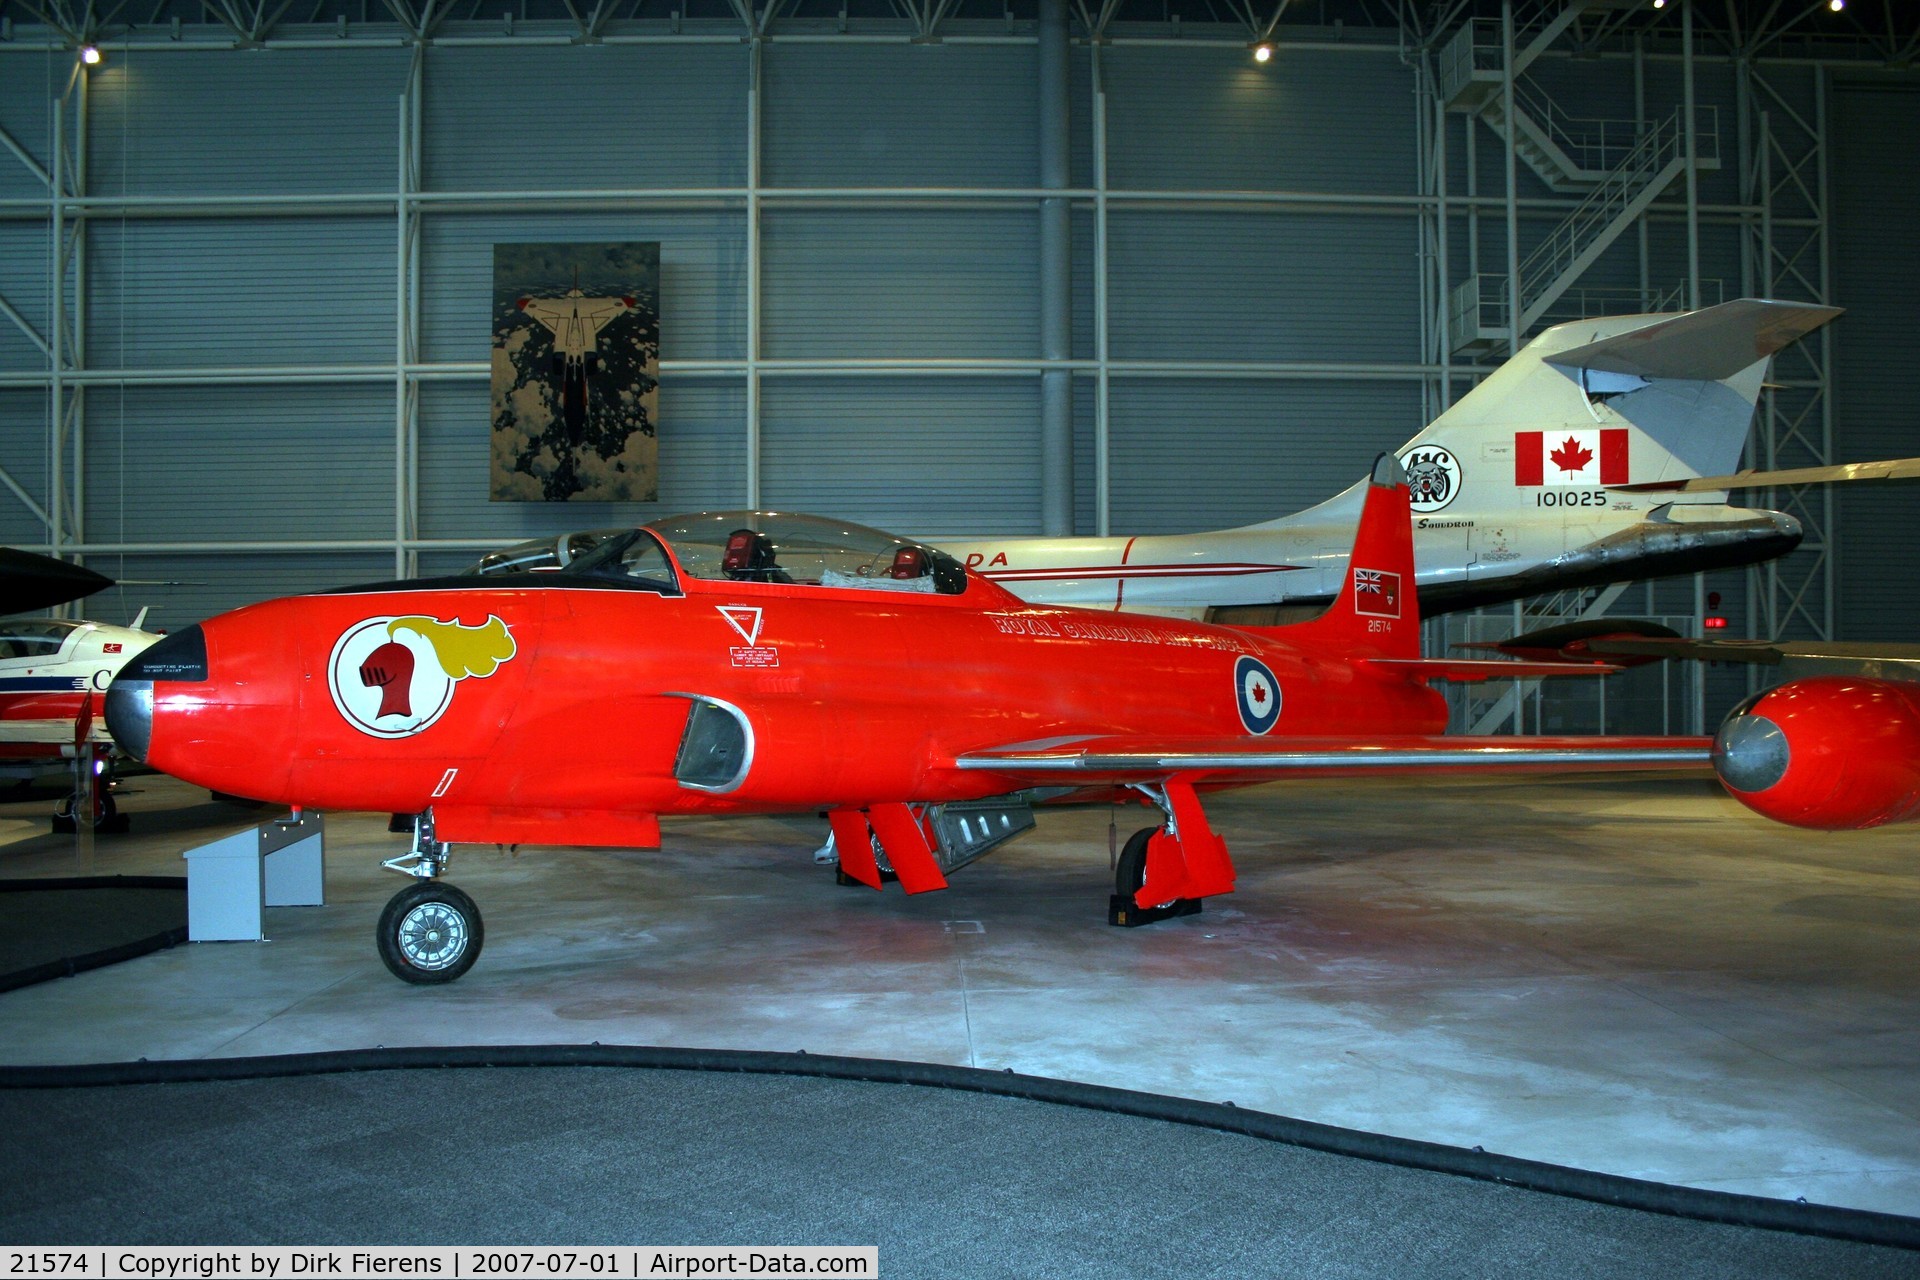 21574, 1957 Canadair CT-133 Silver Star C/N T33-574, T-33 Red Knight, Rockcliff air Museum